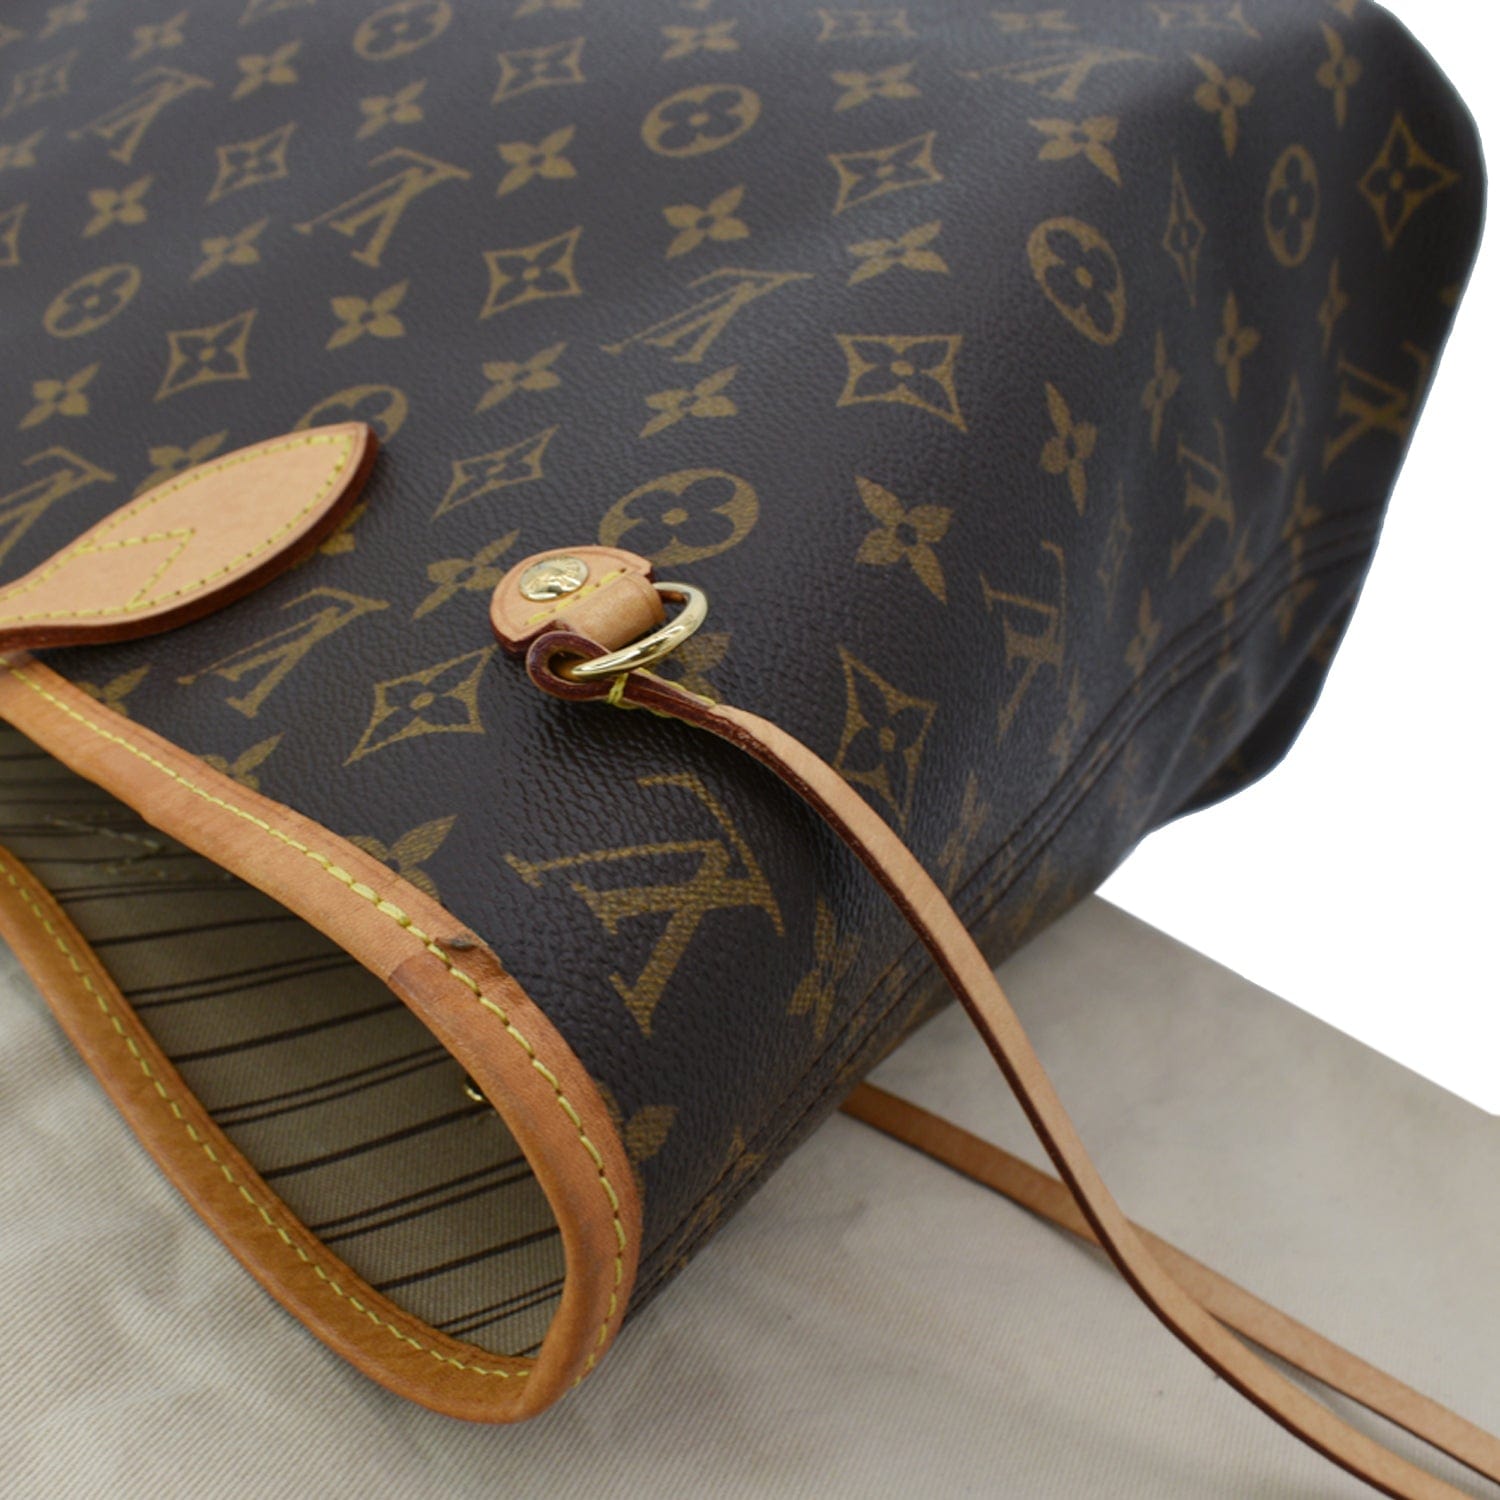 Louis+Vuitton+Neverfull+Tote+MM+Brown+Canvas+Monogram for sale online